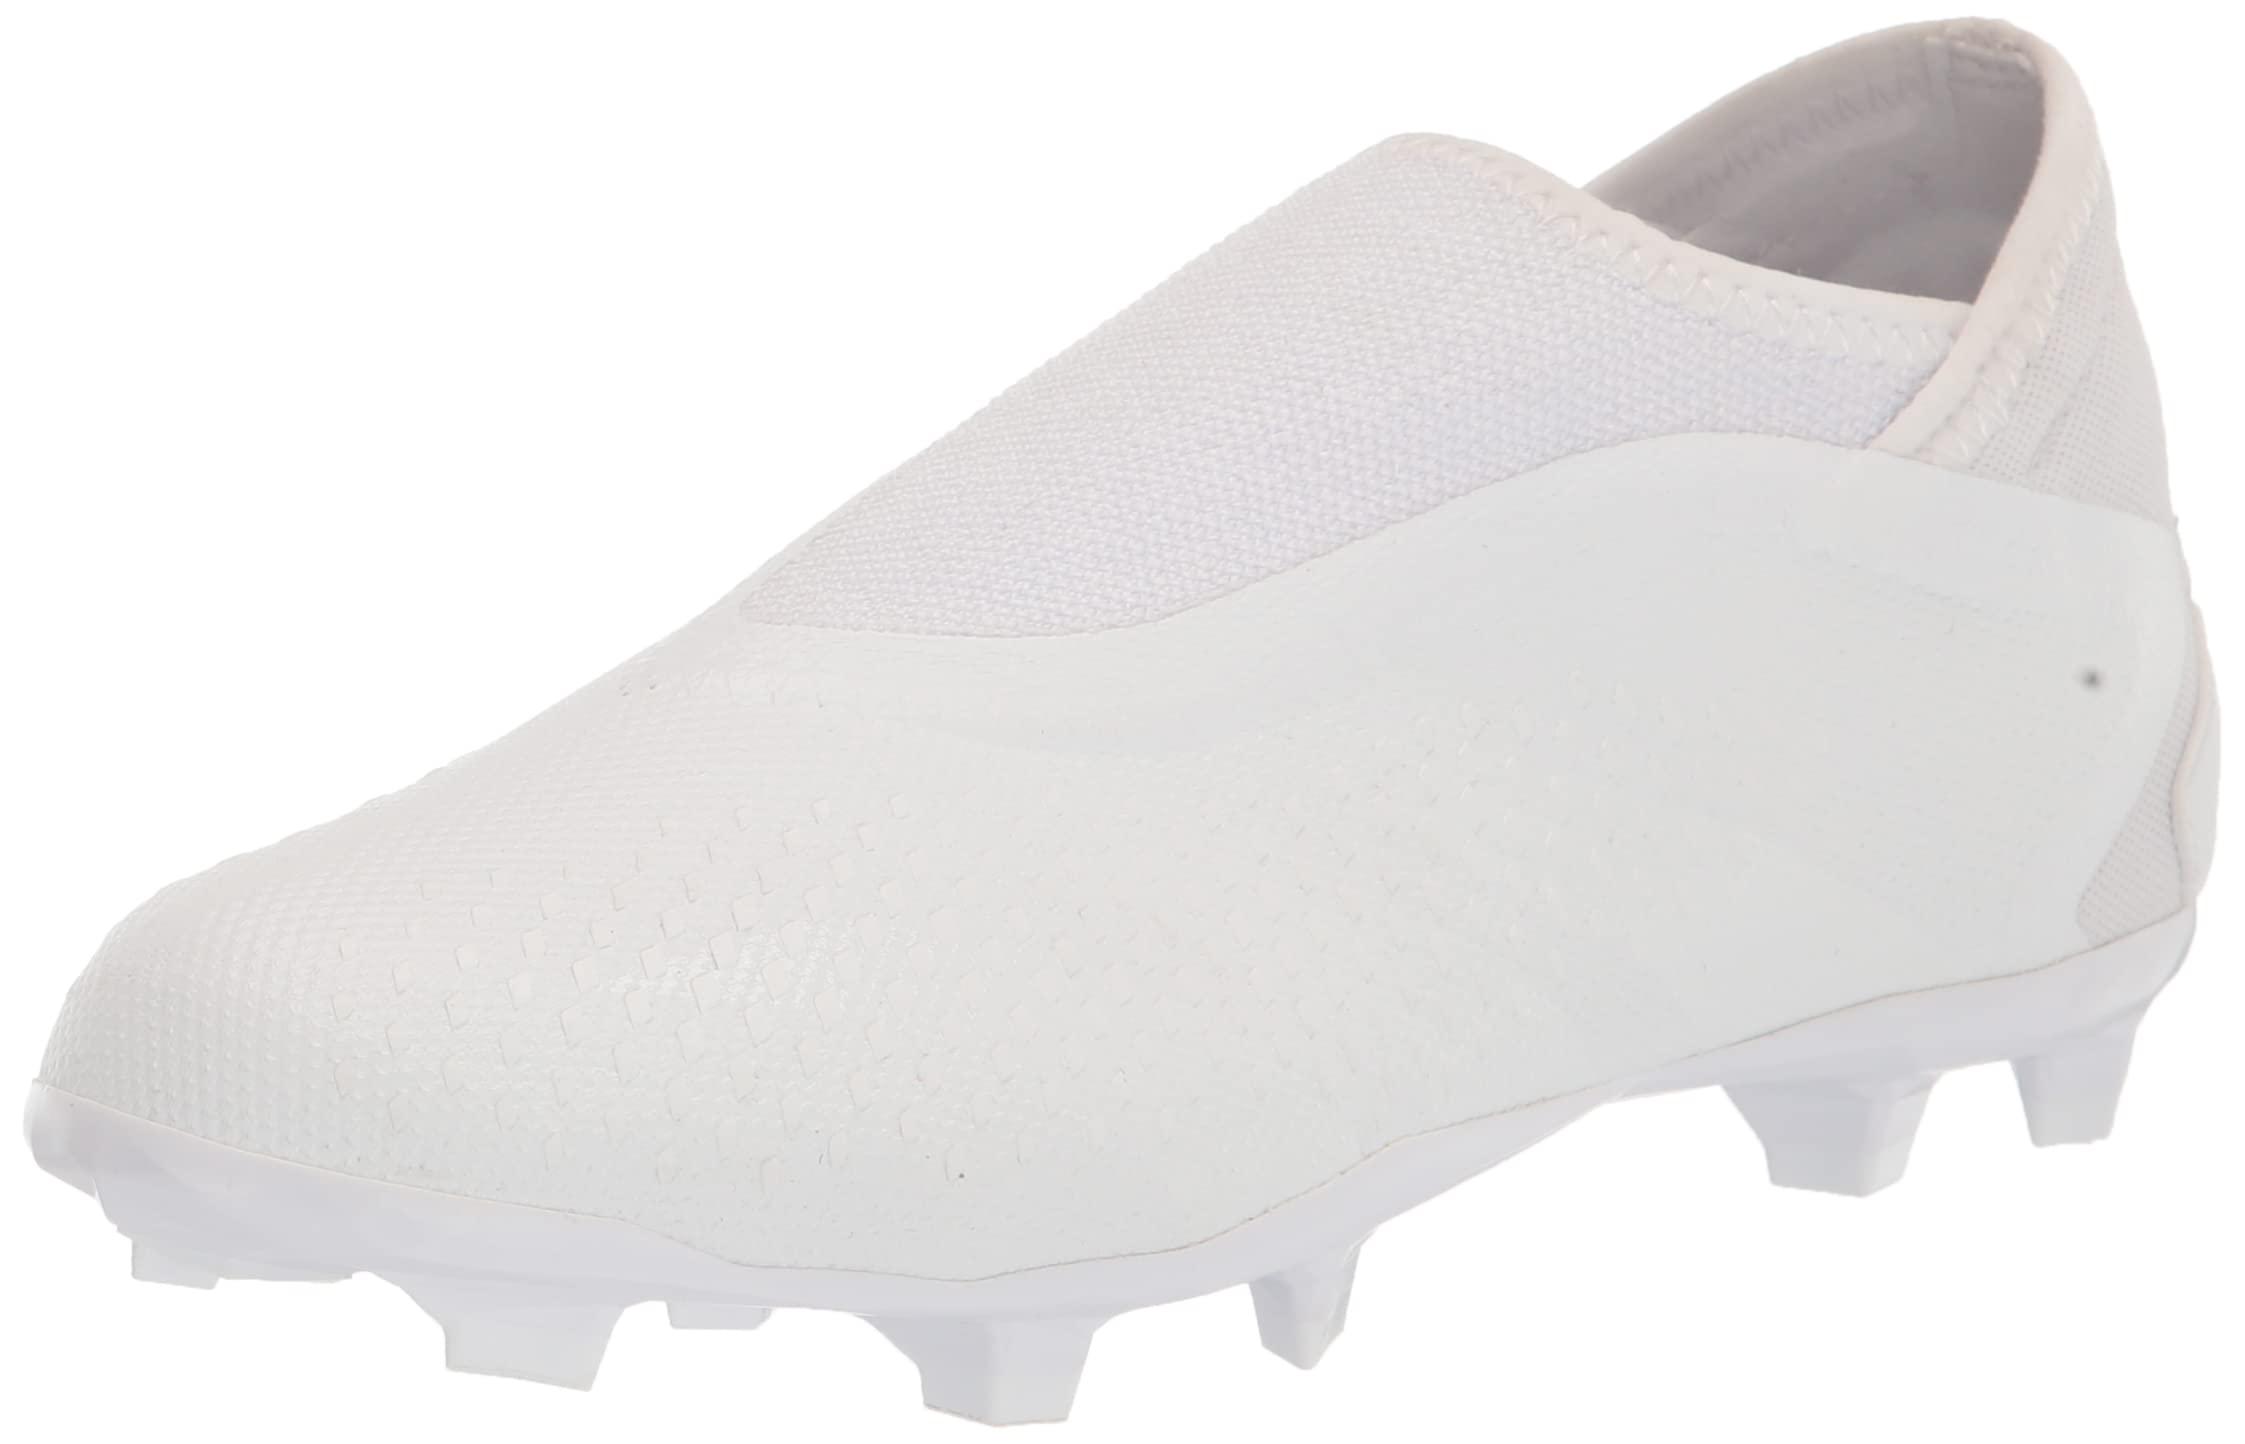 adidas Predator Accuracy.3 Firm Ground Soccer Shoe in White | Lyst